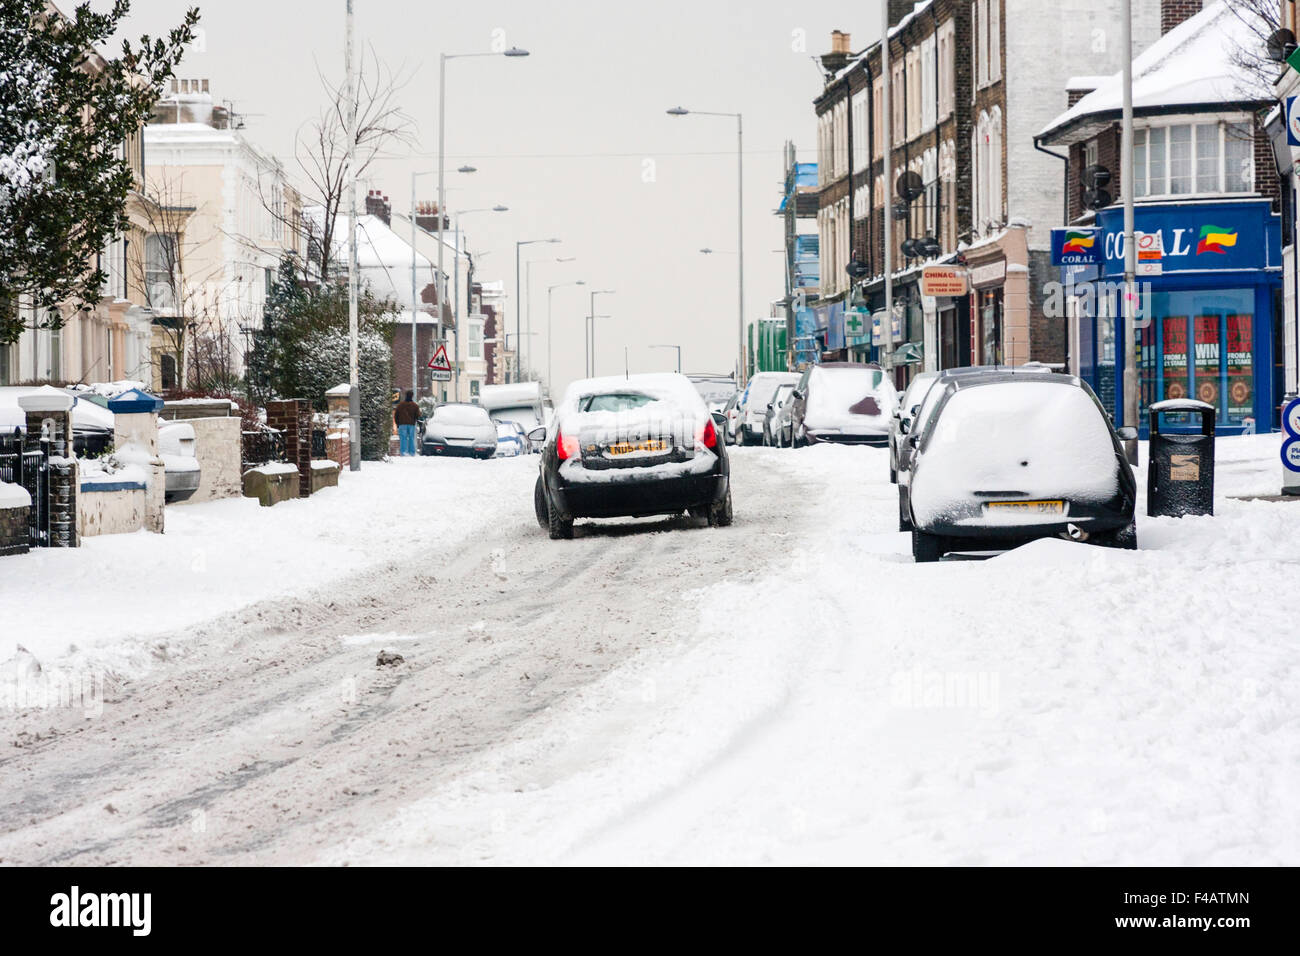 Bad weather, England, Ramsgate town. Snow covered main road with cars parked and car attempting to drive along in hazadous conditions after snowfall. Stock Photo